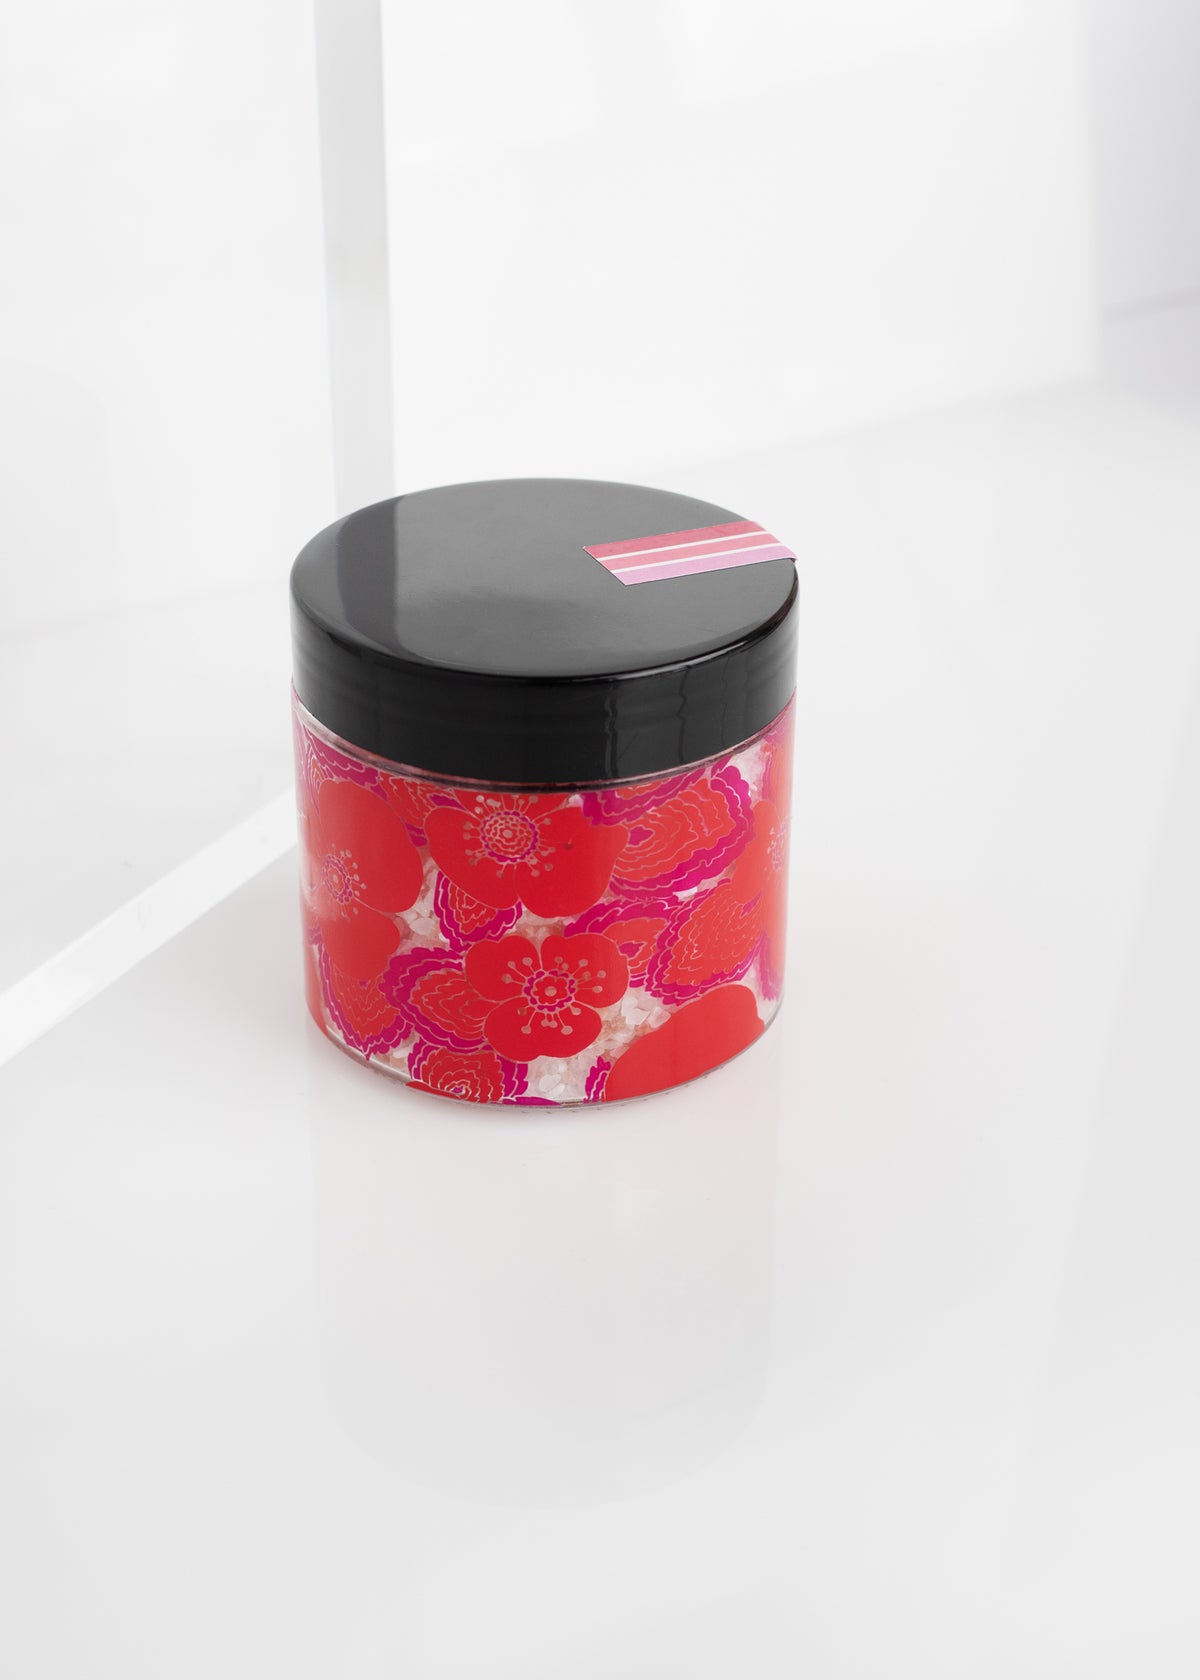 A Margot Elena cosmetic jar with a black lid and a Wild Geranium + Rosewood pattern on the body, placed on a white reflective surface in a bright interior.